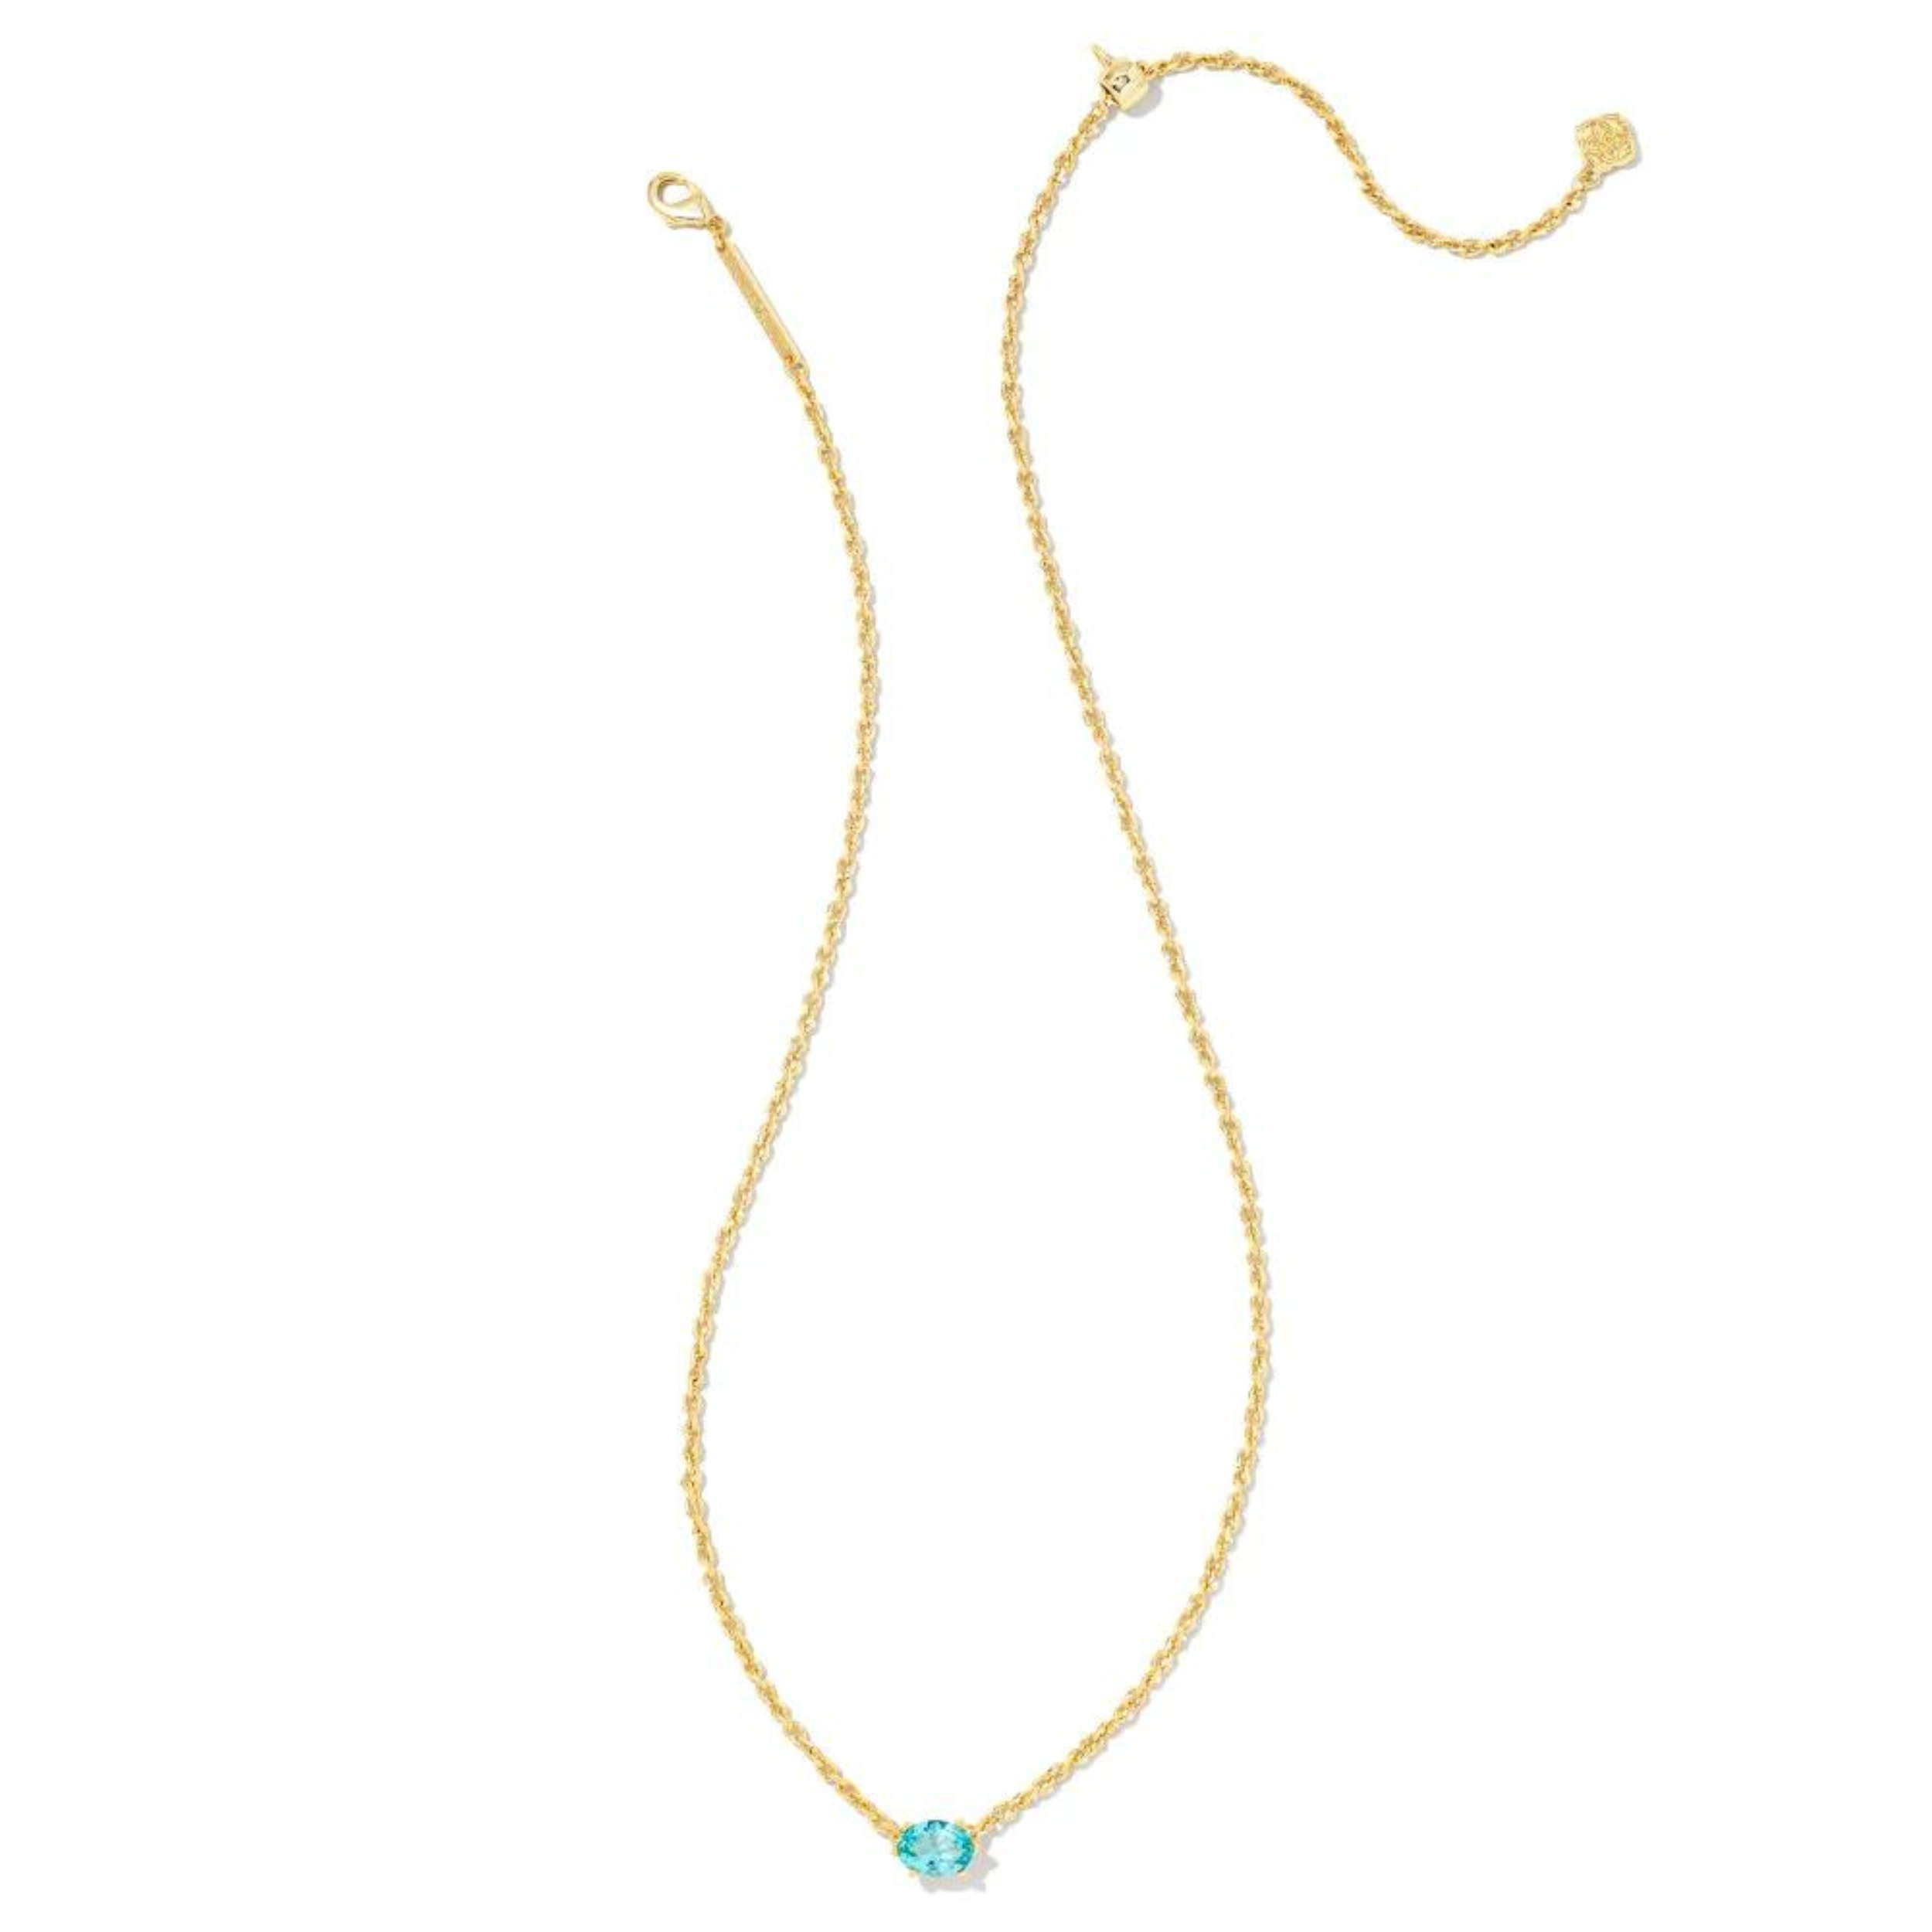 Kendra Scott | Cailin Gold Pendant Necklace in Aqua Crystal - Giddy Up Glamour Boutique